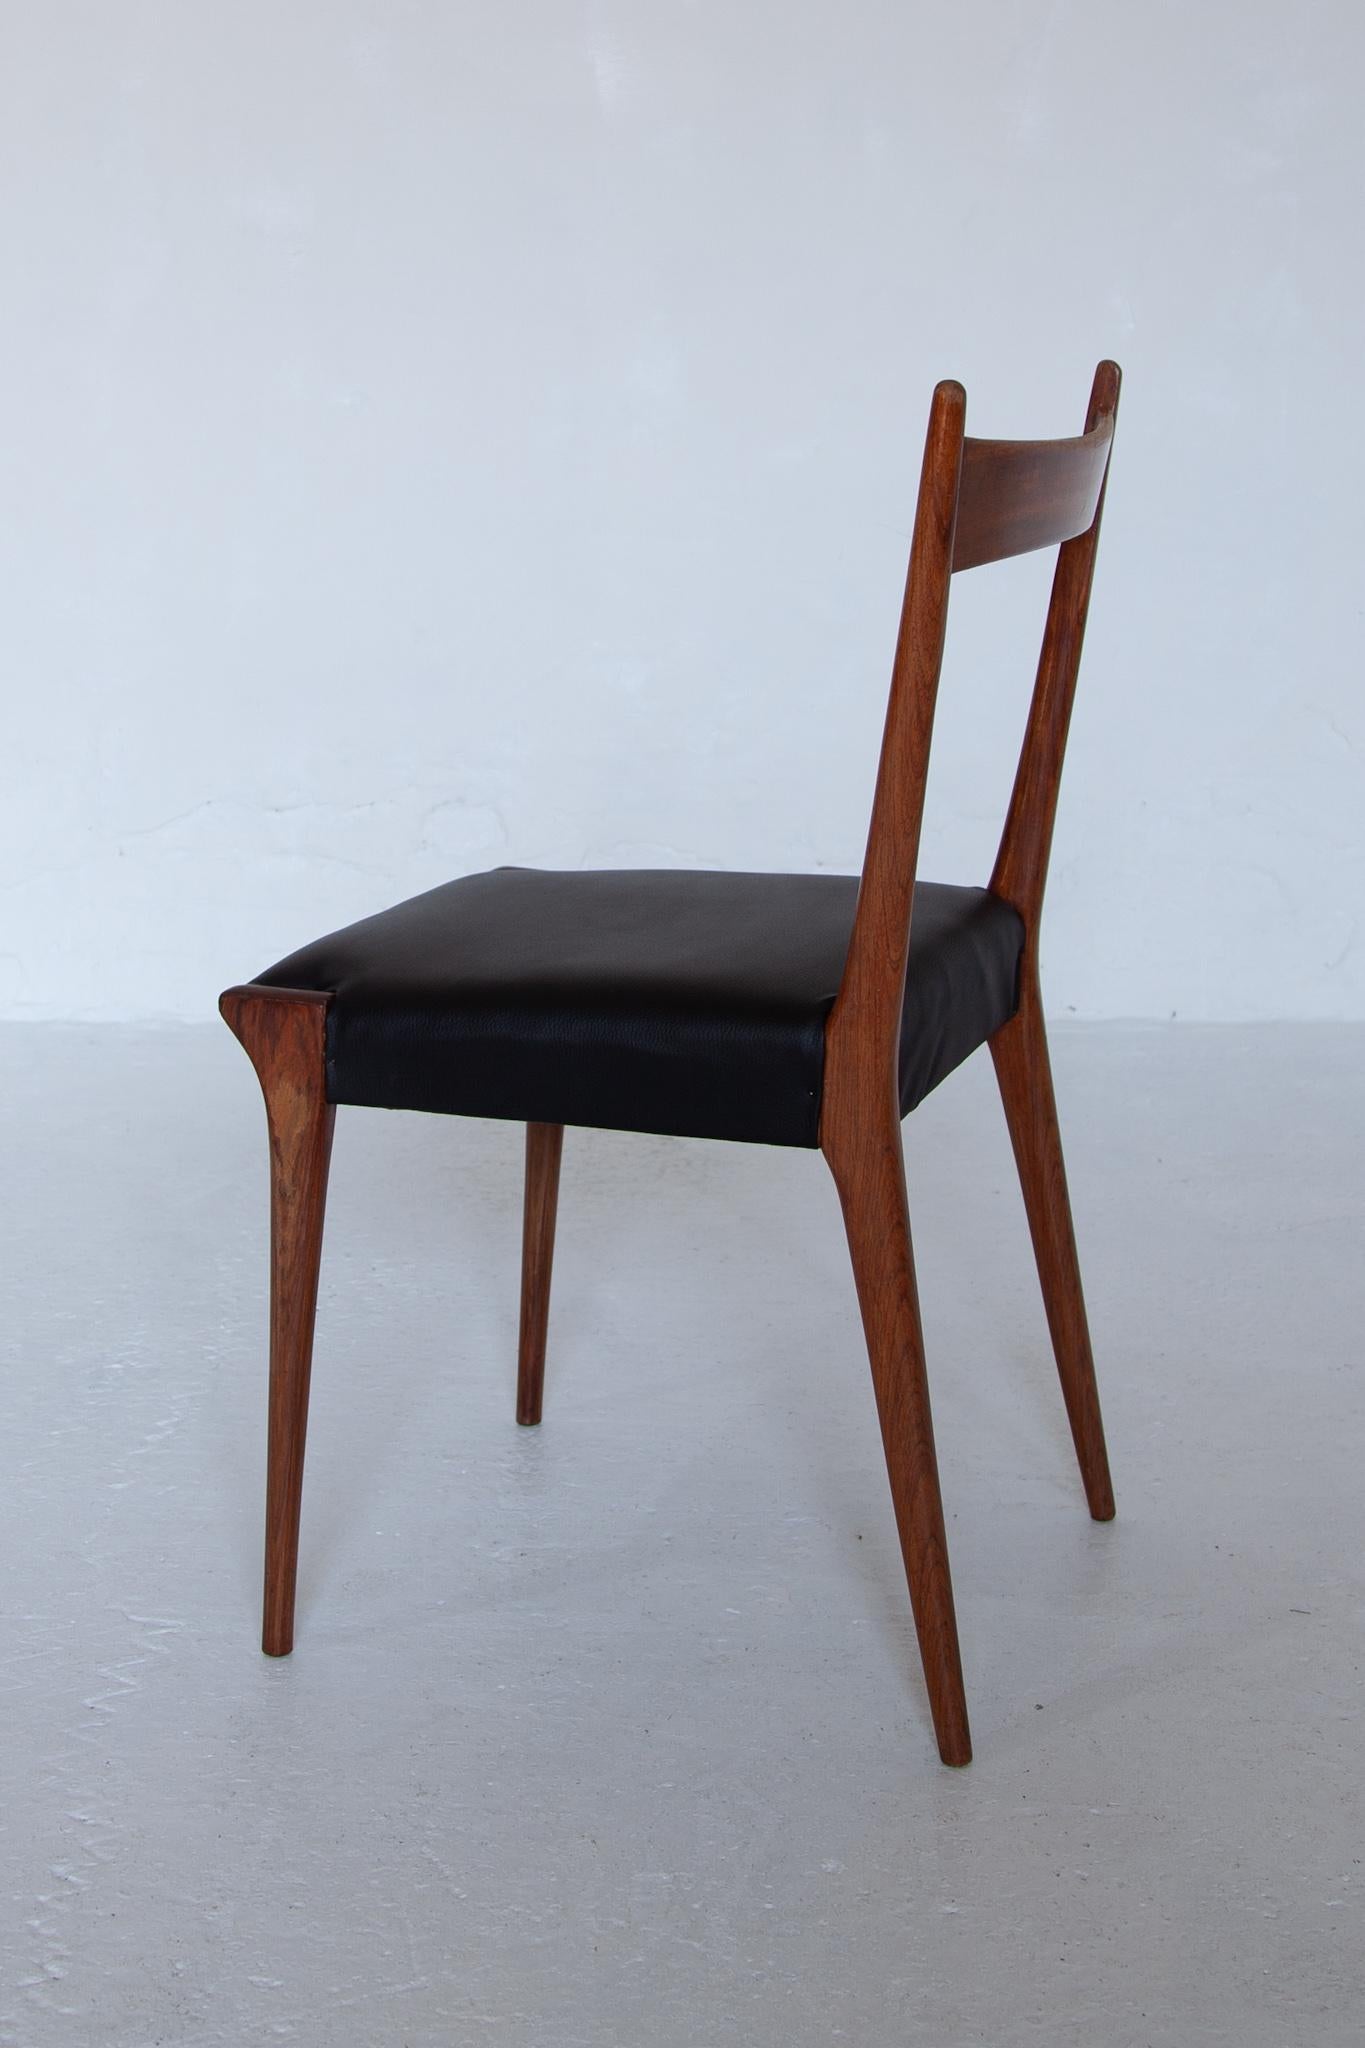 Mid-20th Century Set of Eight Dining Chairs 1958, Belgium for Belform by Alfred Hendrickx For Sale